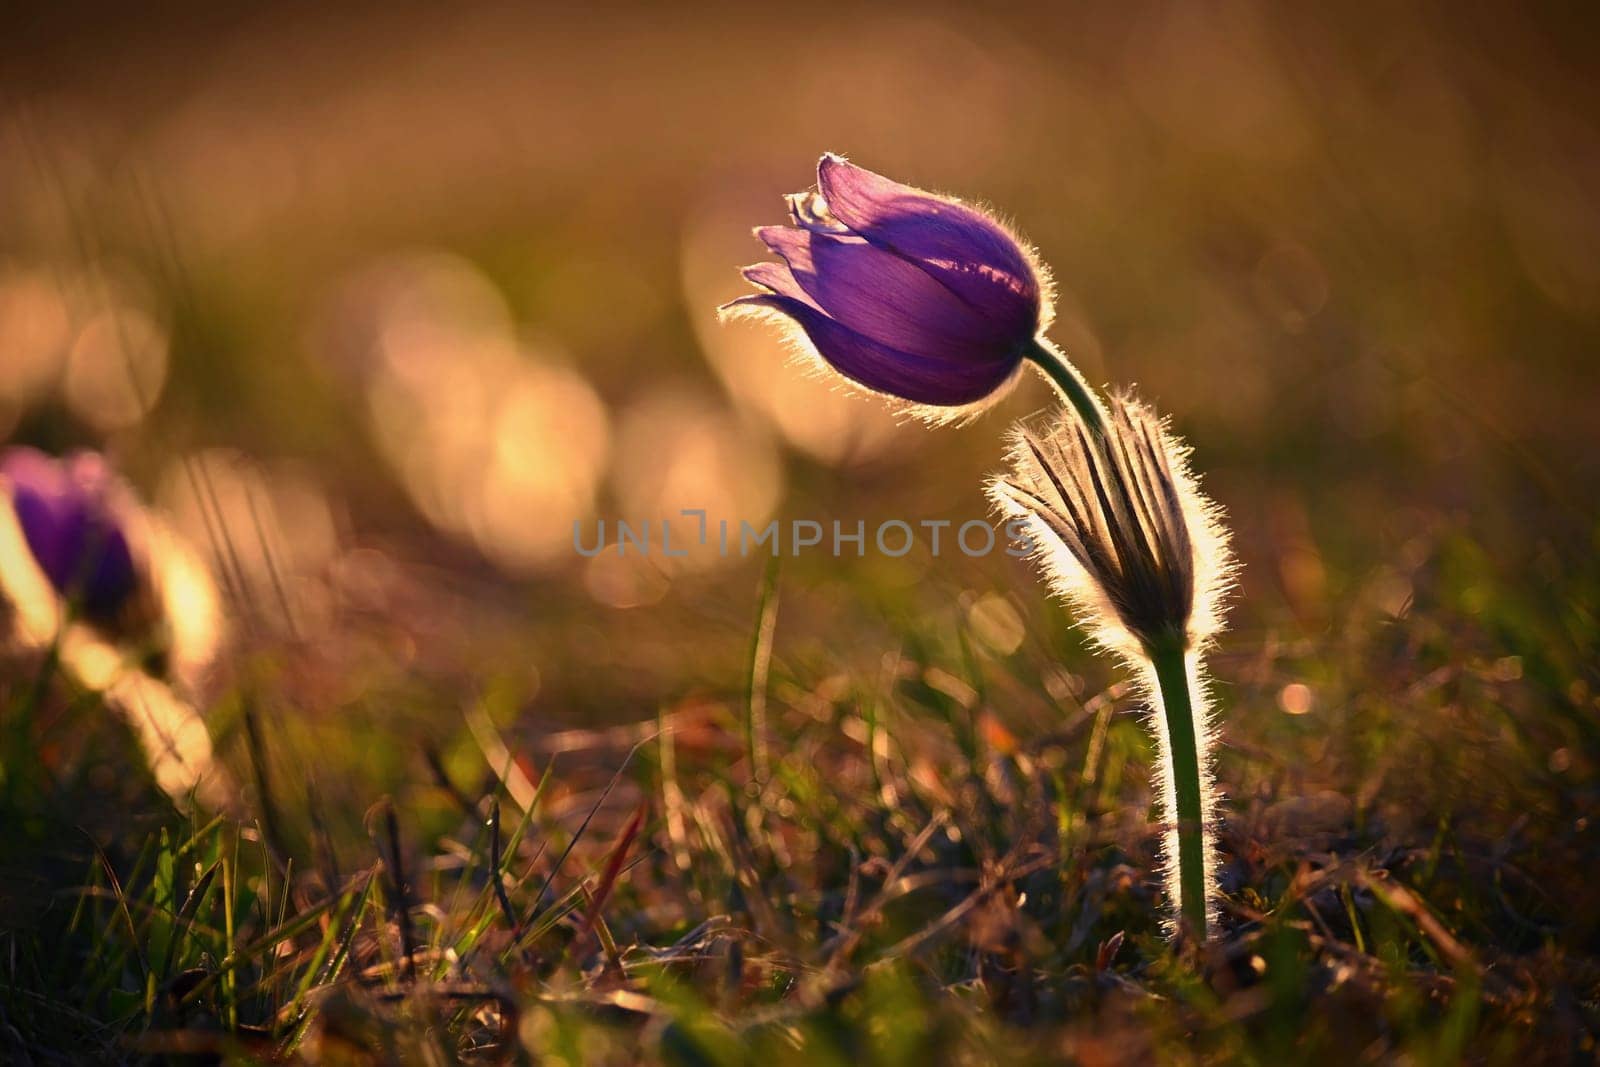 Spring flowers. Beautifully blossoming pasque flower and sun with a natural colored background. (Pulsatilla grandis) by Montypeter